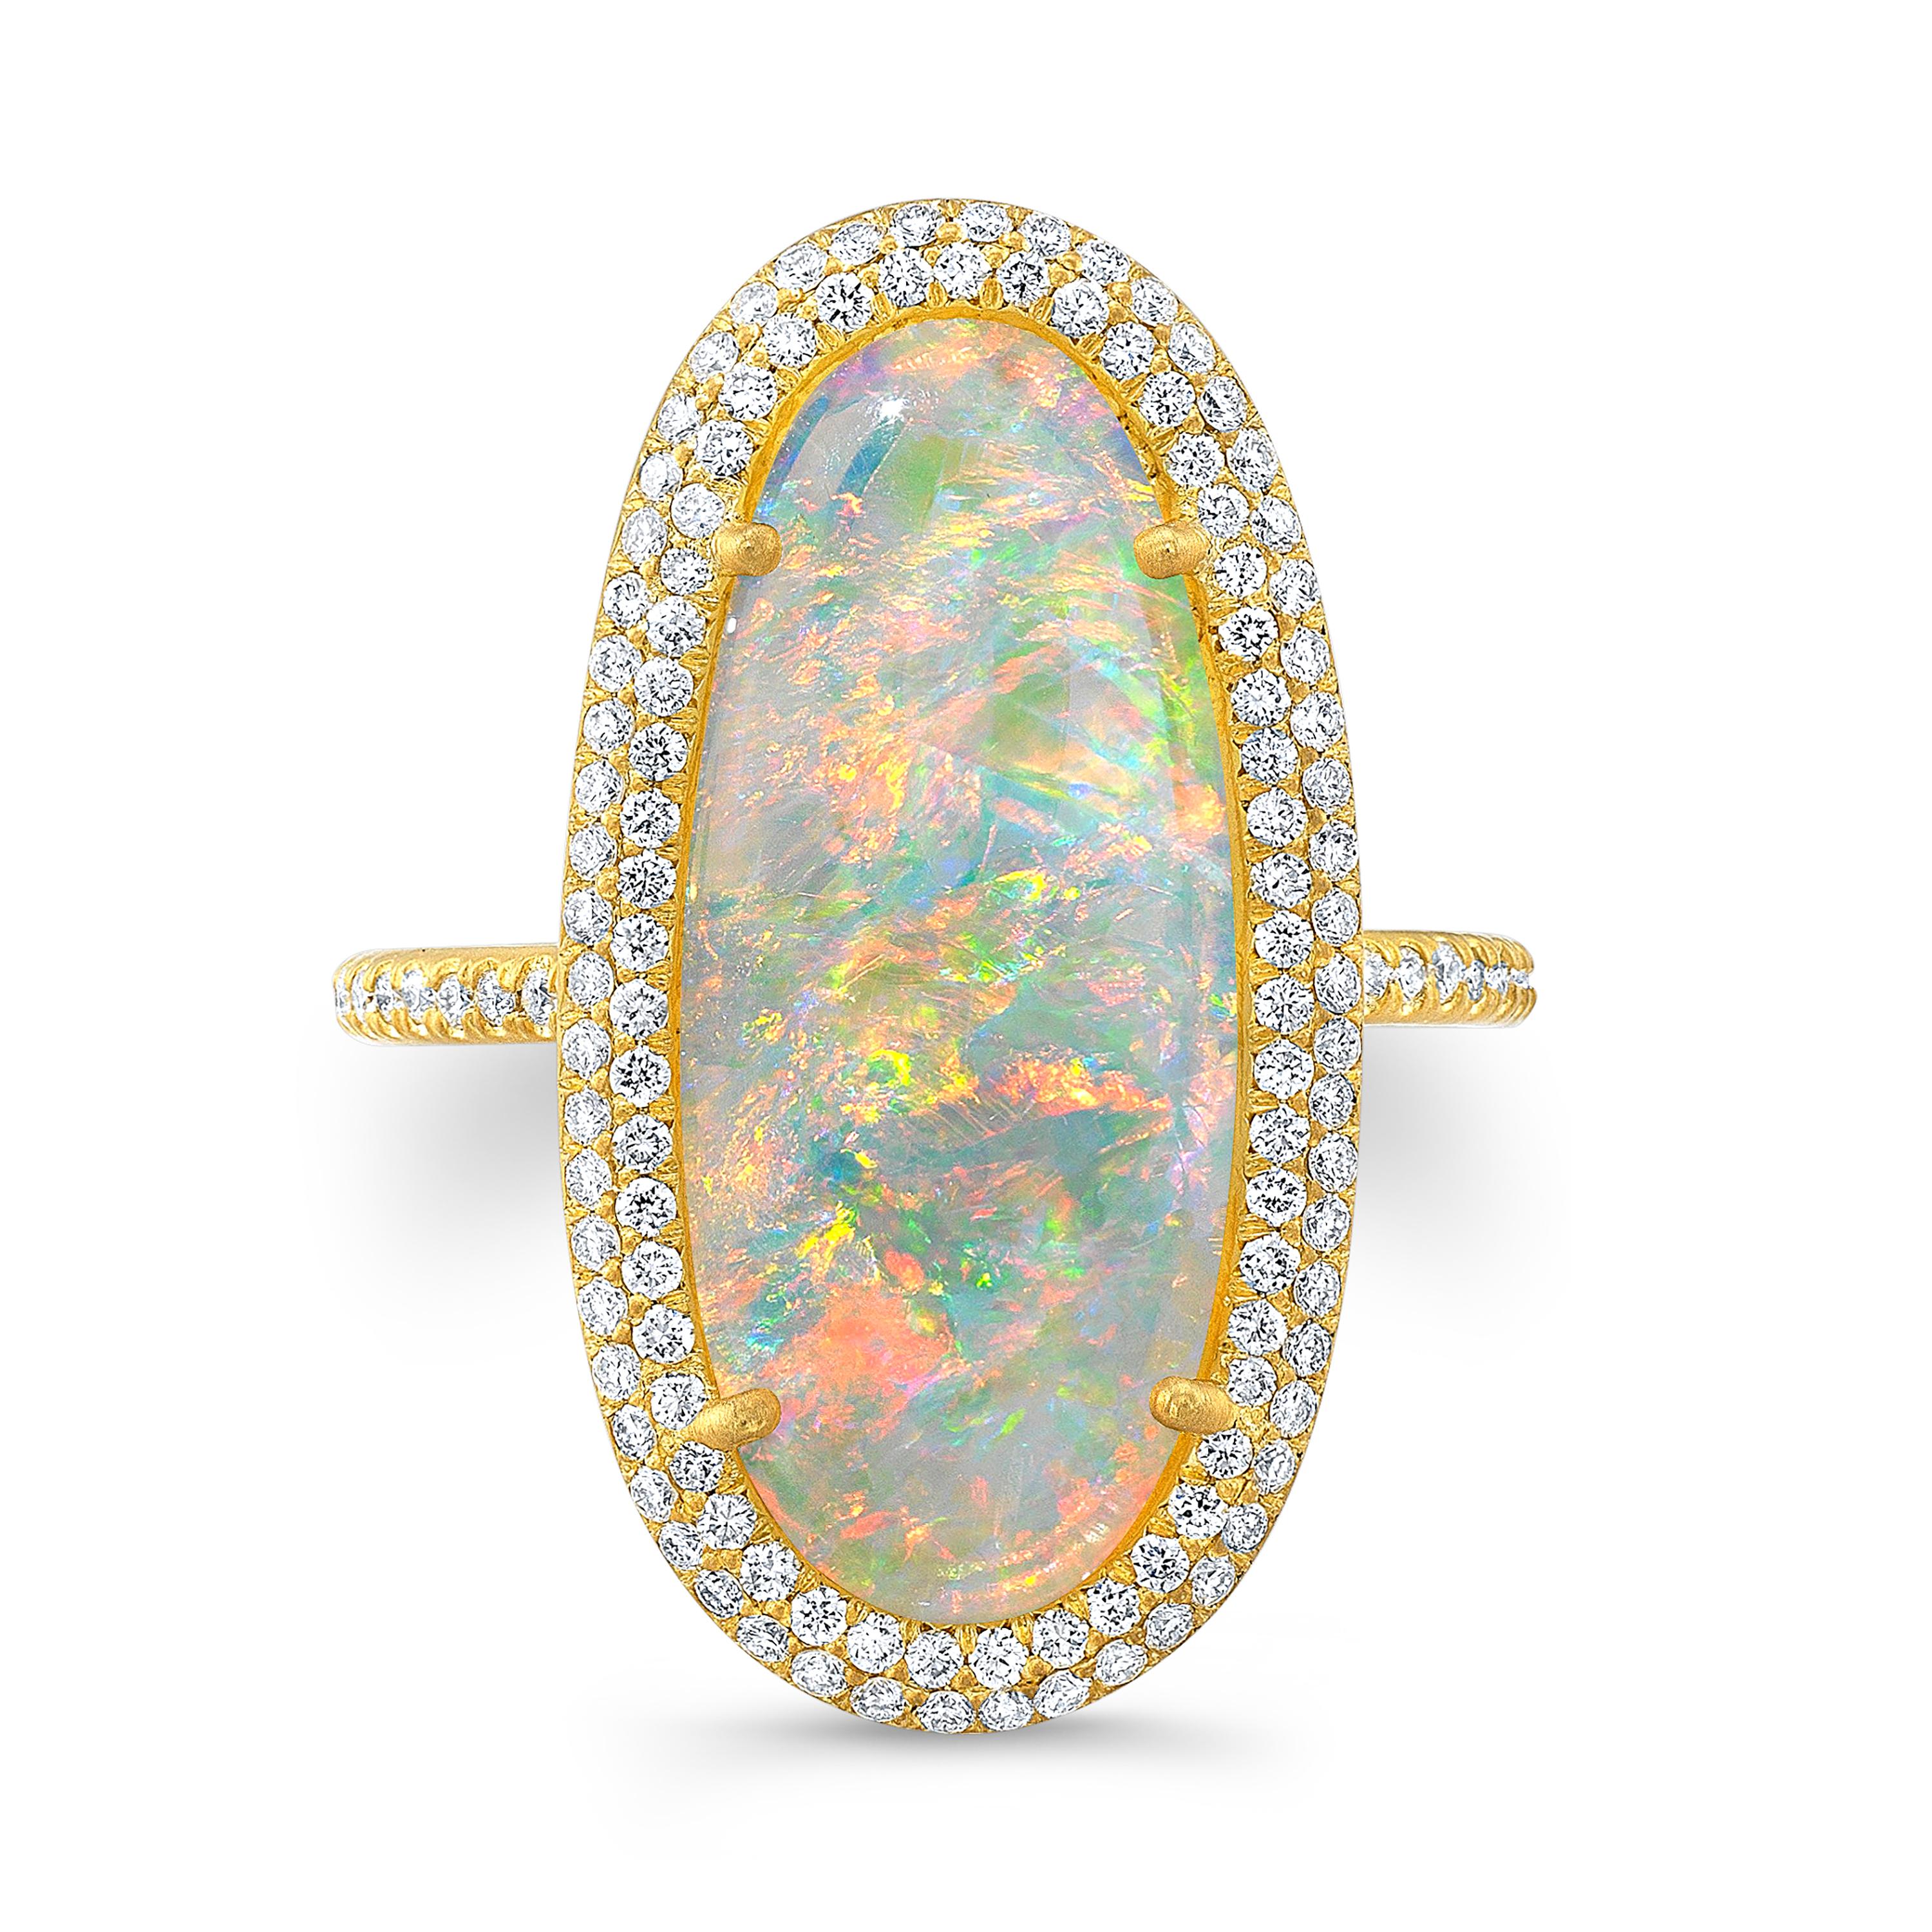 2.55ct Coober Pedy Australian Crystal Opal with .58ct vs quality Diamond Pave Double Halo and Band in 18k Matte Finish Yellow Gold Diamond Pave goes 2/3 around the band. Flower Motif on back of setting with Mile Diamond Accent Size 6 1/2. Handmade